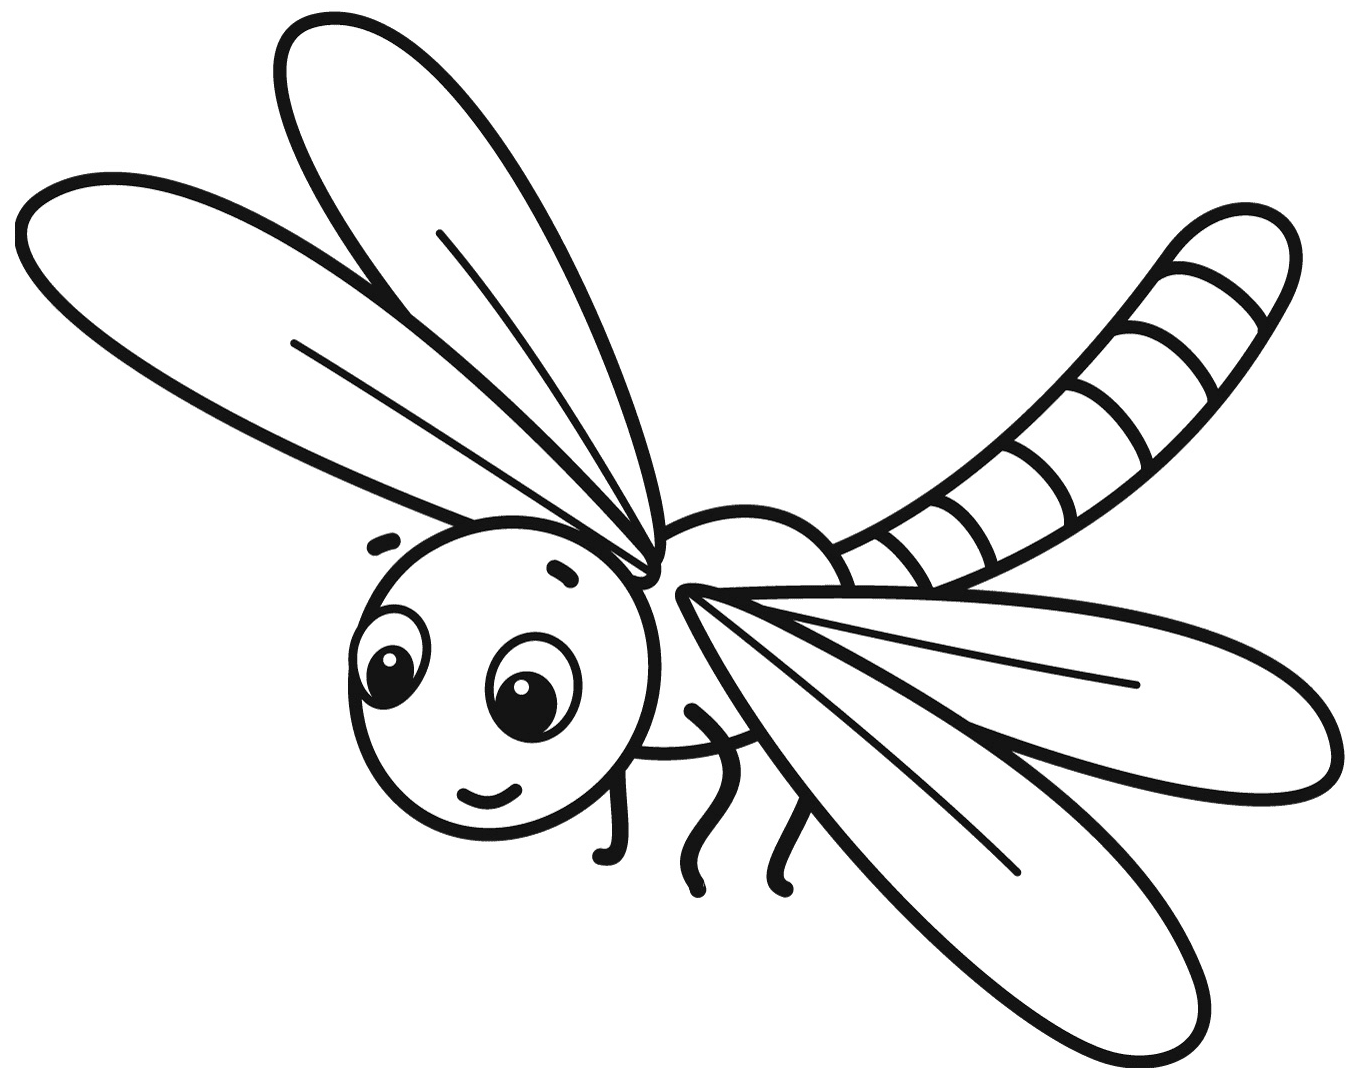 Dragonfly coloring pages printable for free download